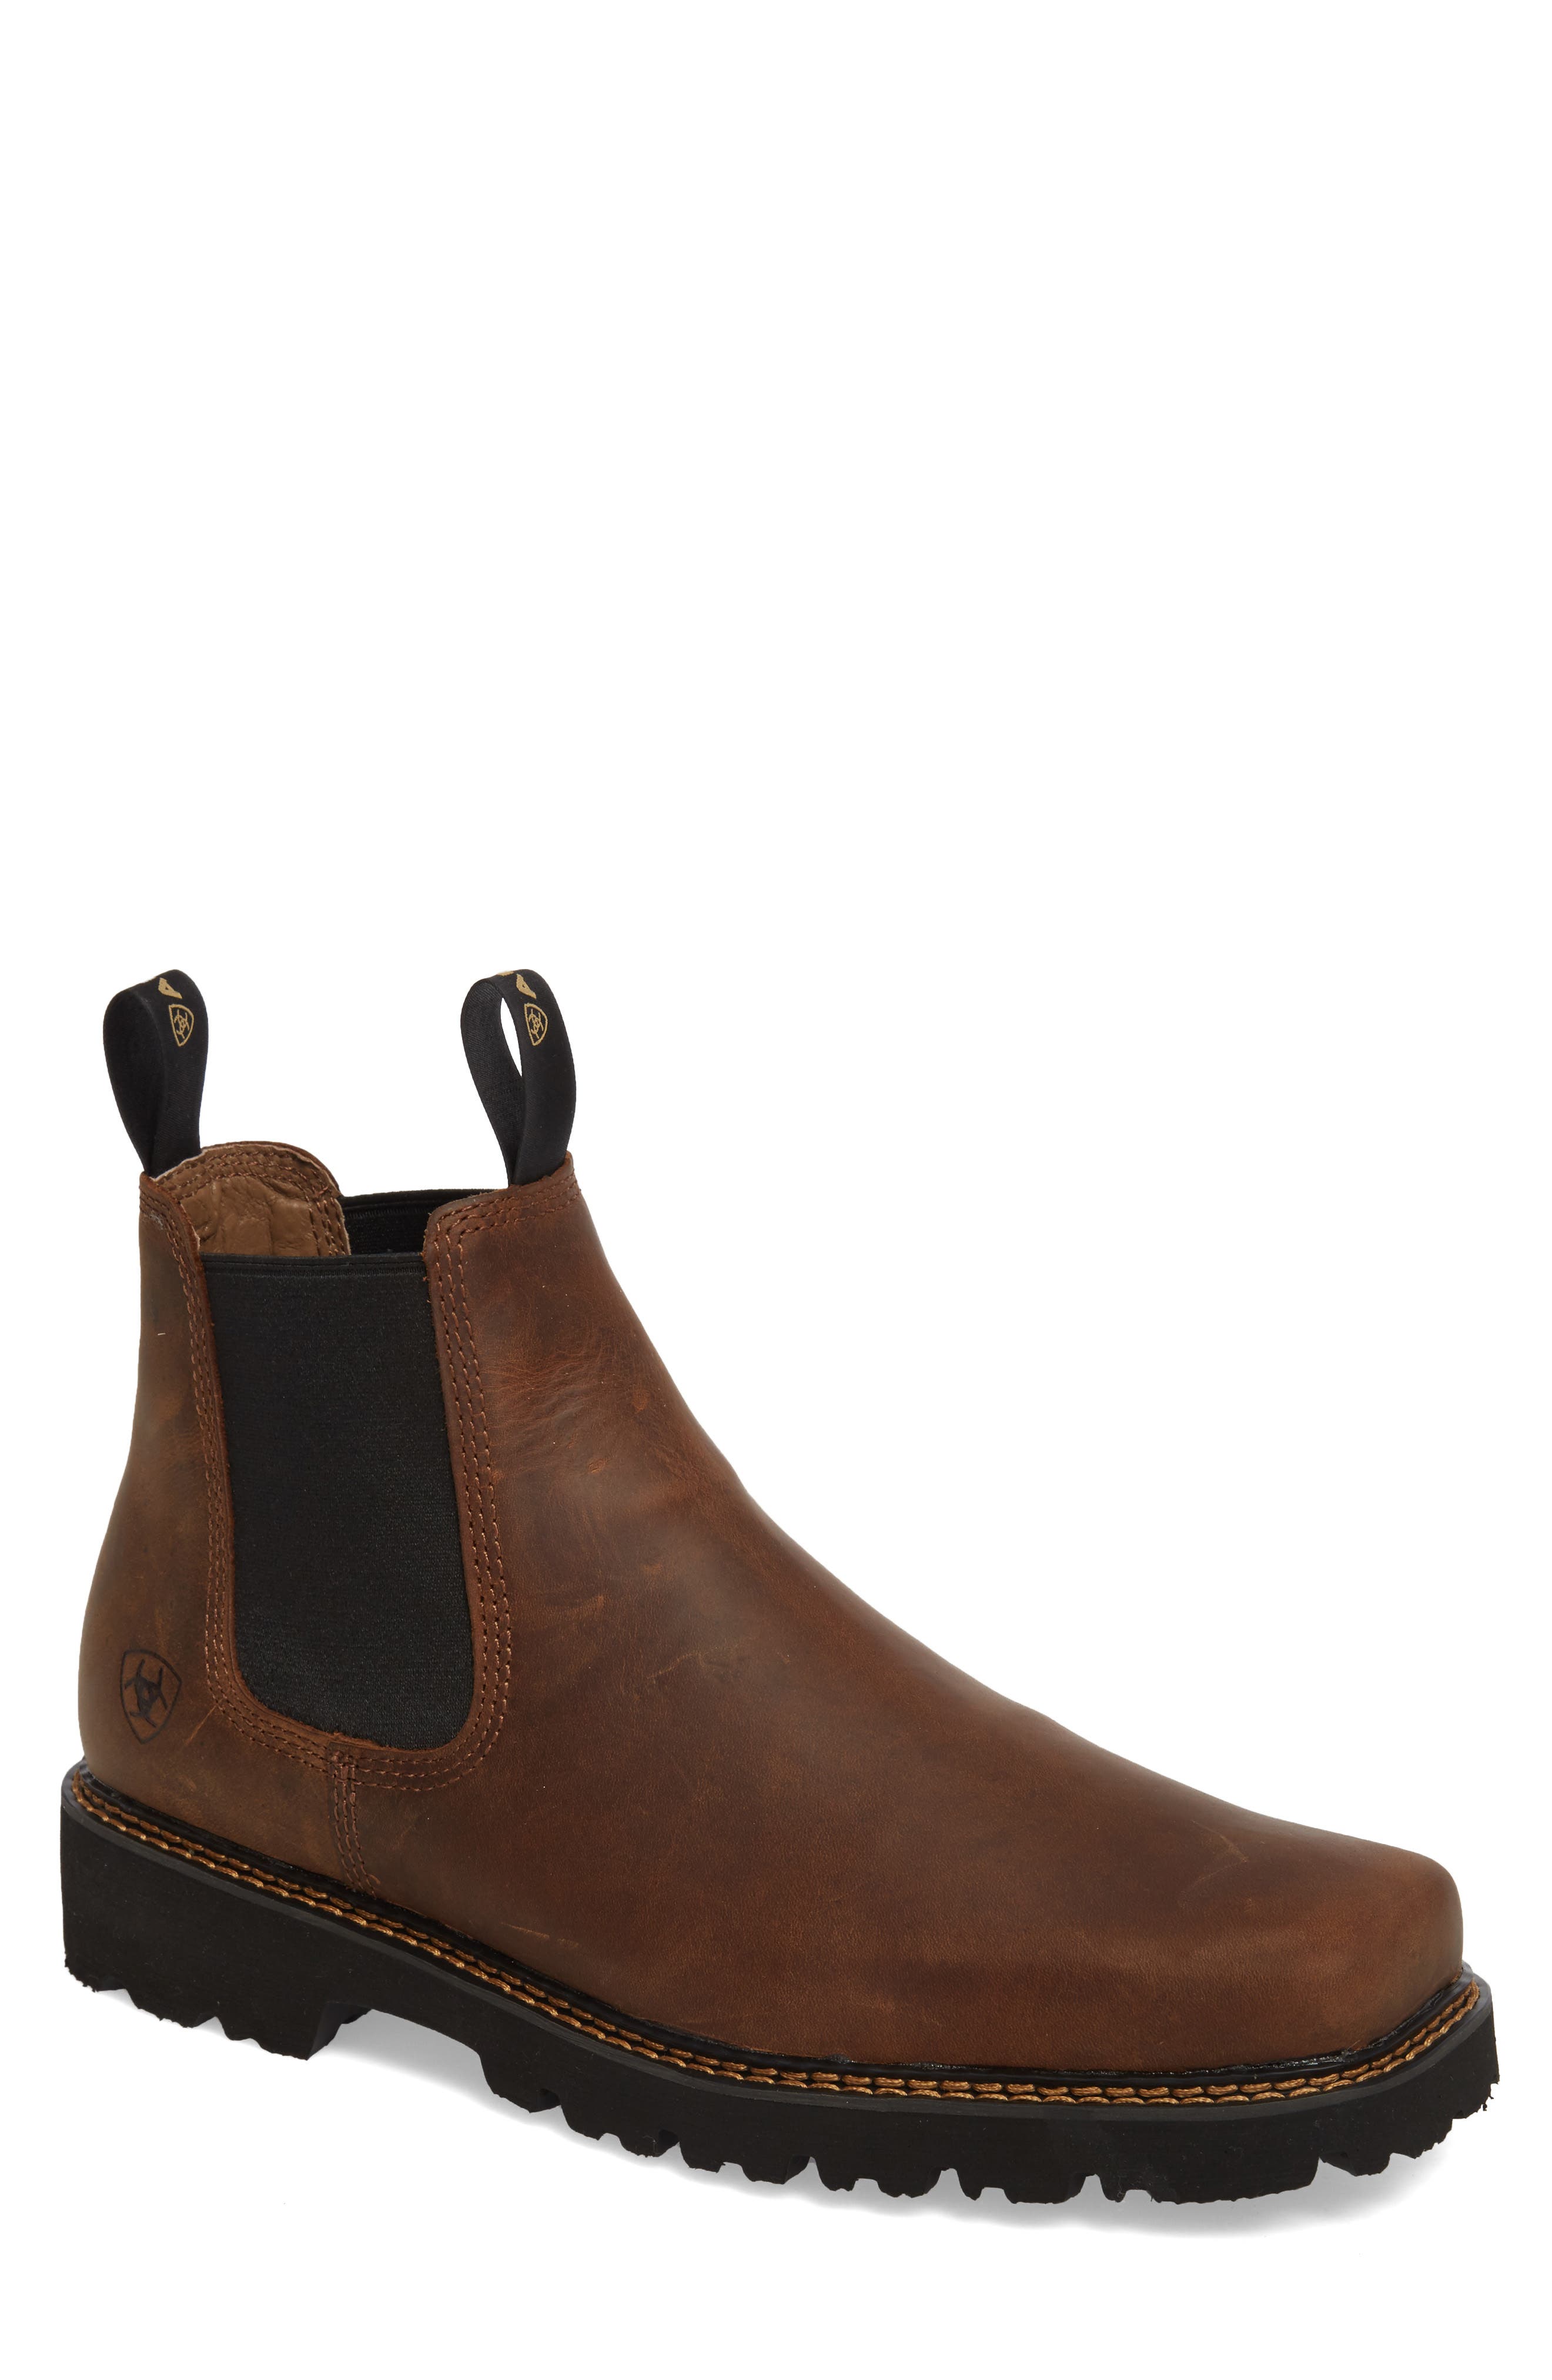 chelsea boots rugged